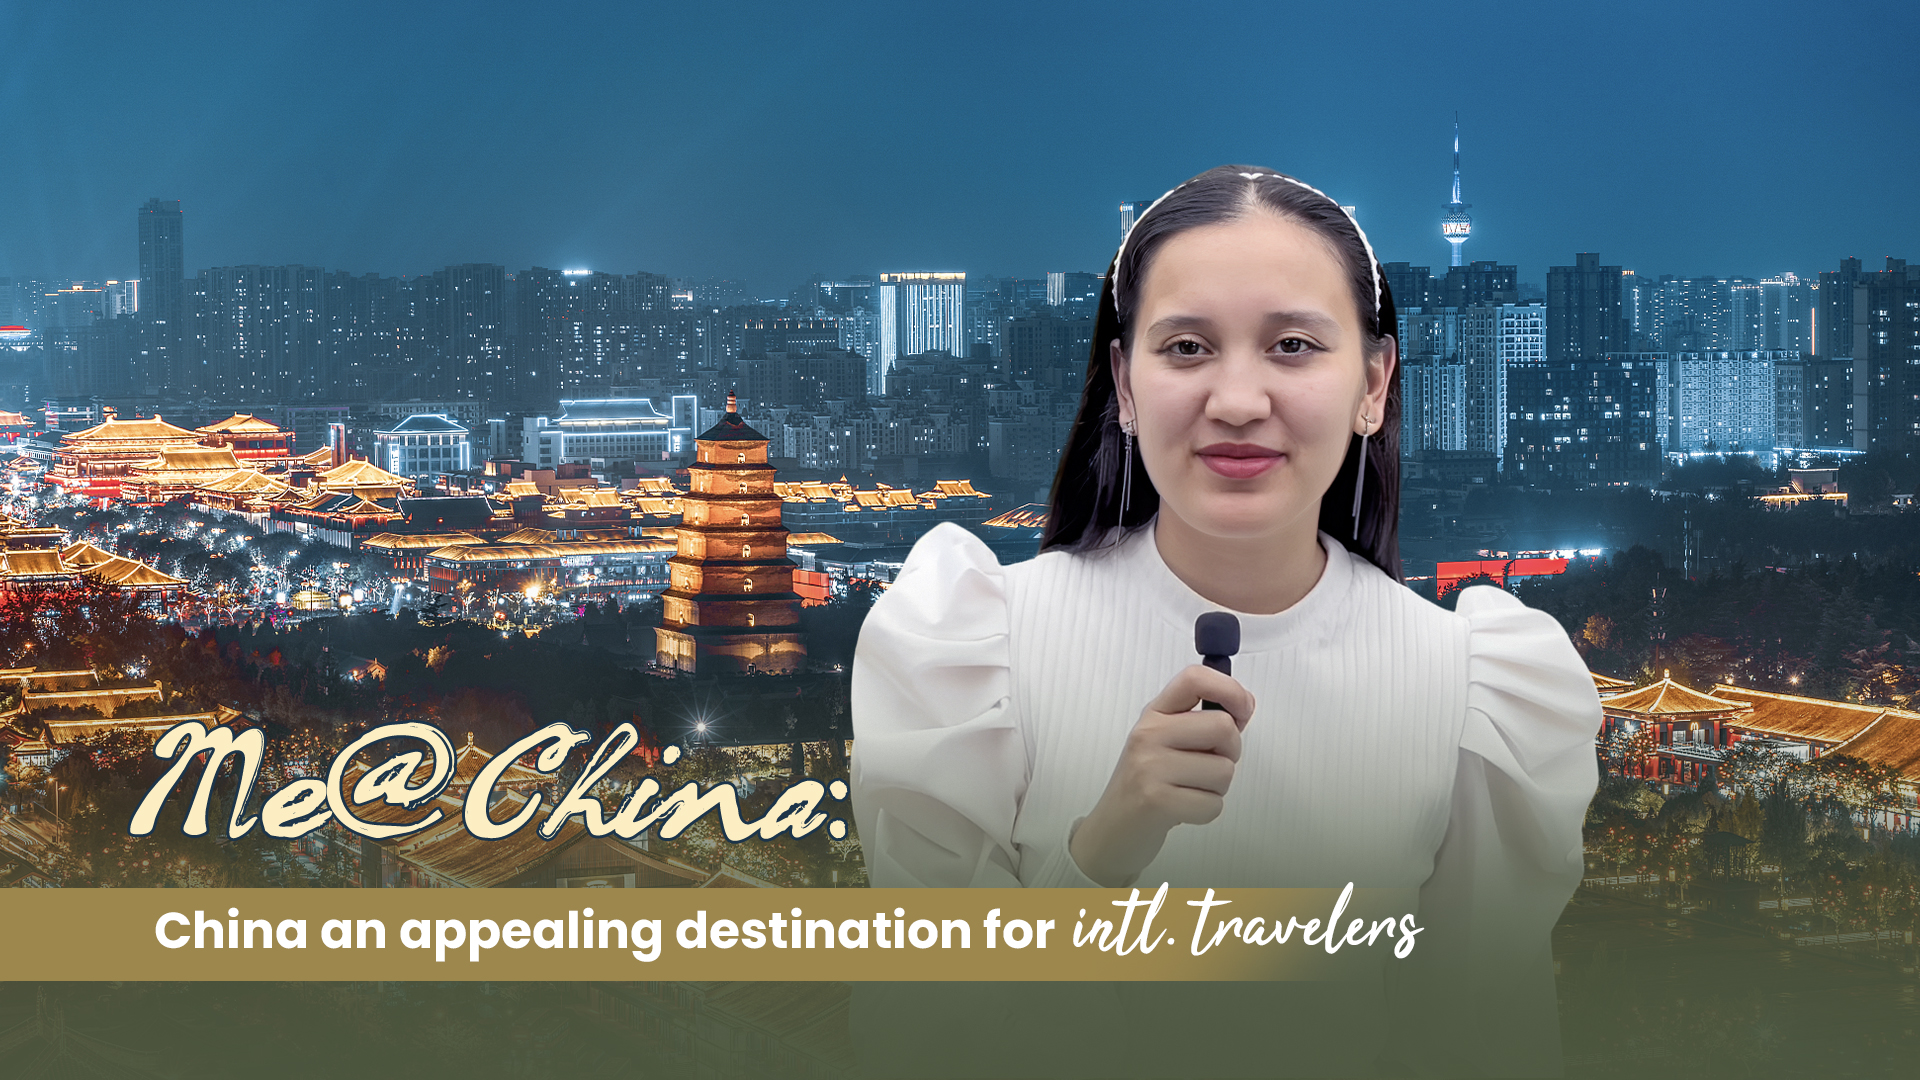 Me@China: China an appealing destination for intl travelers